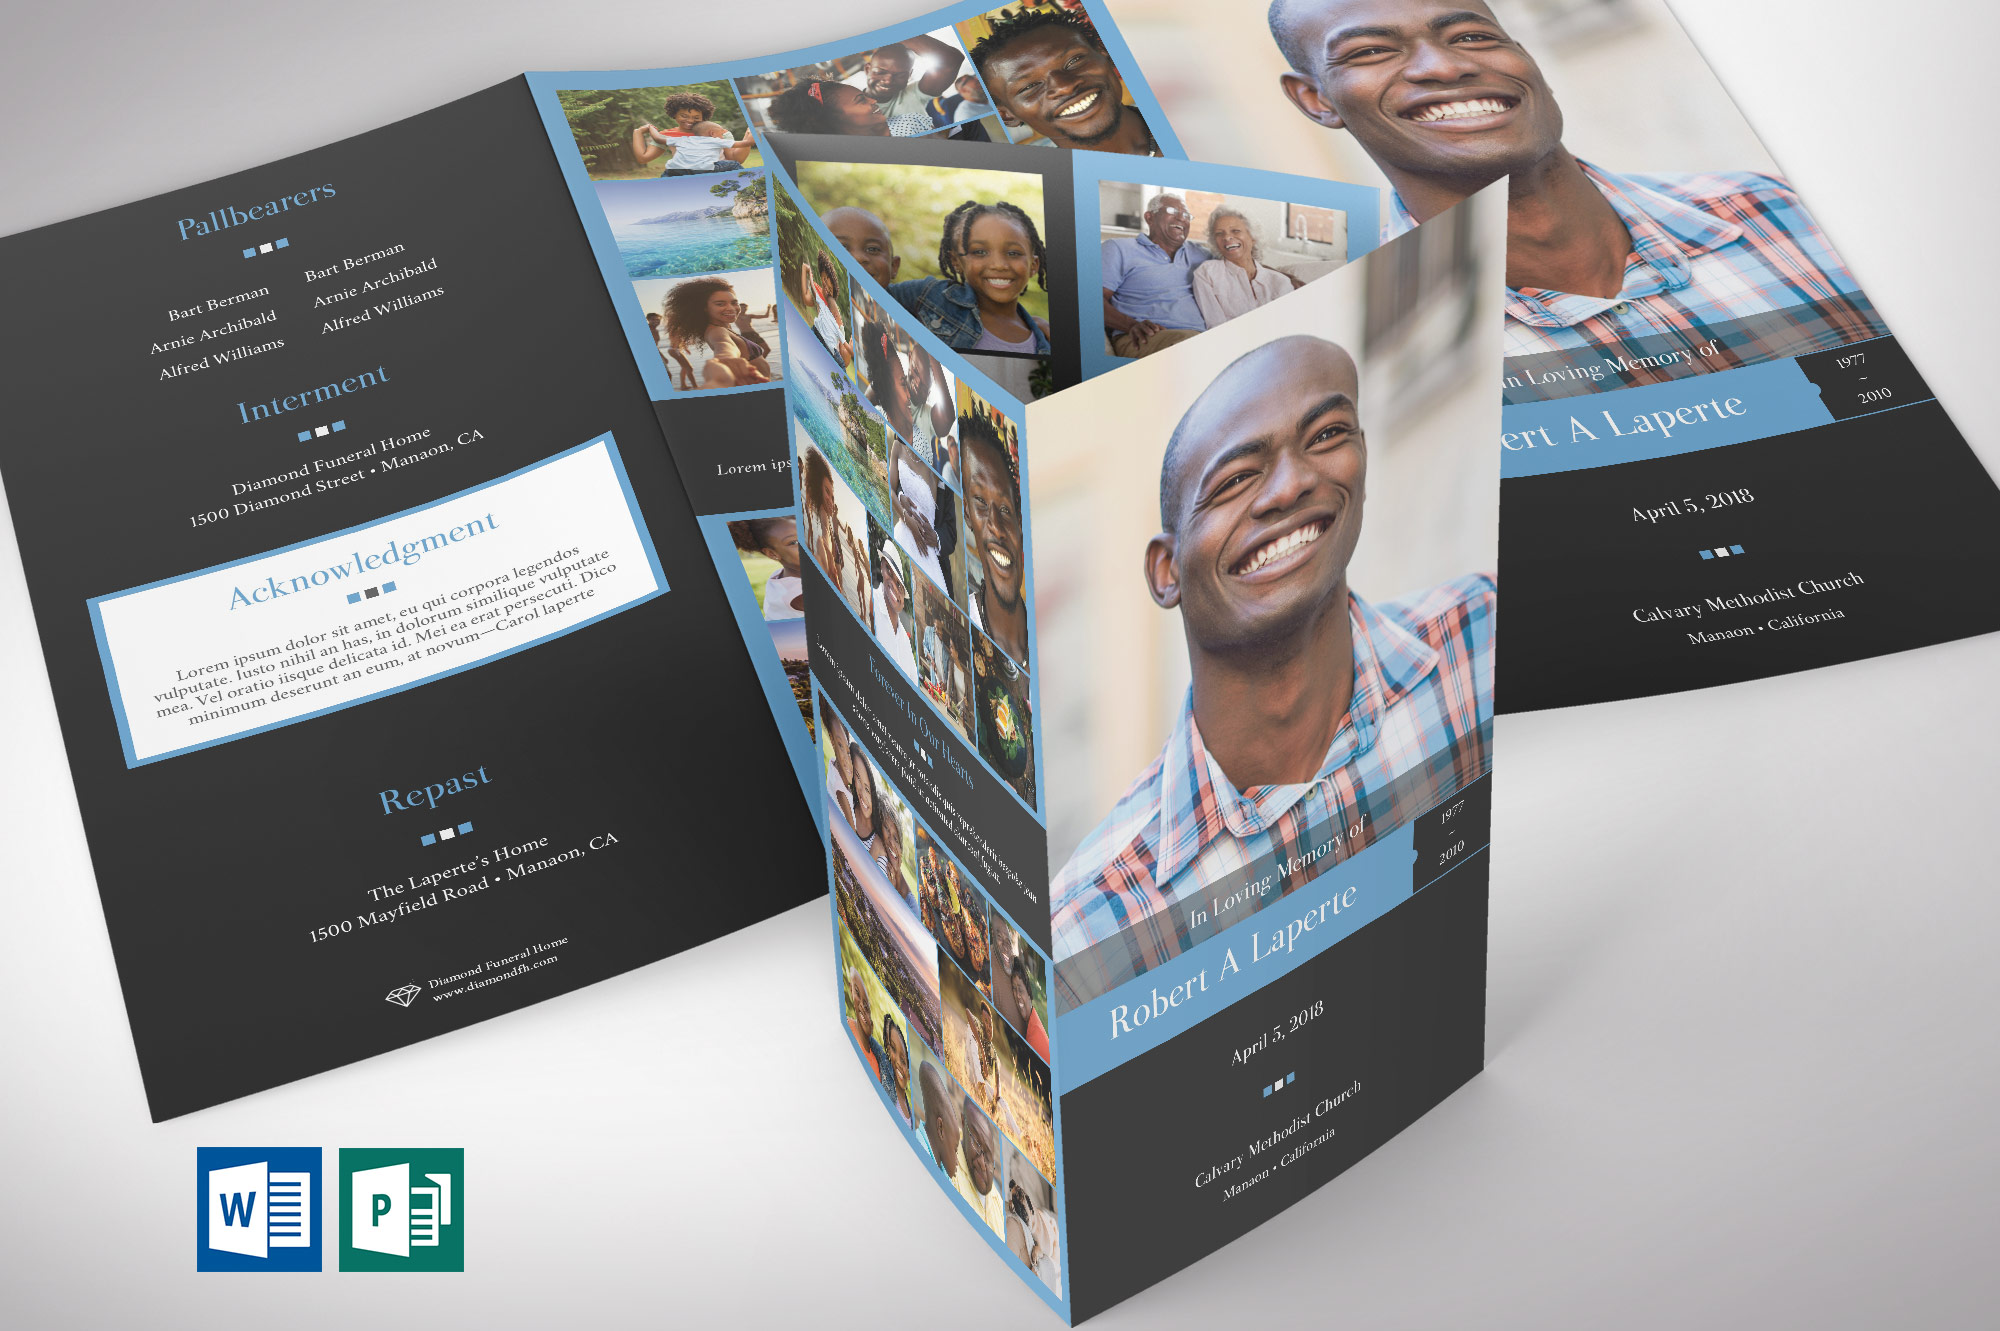 Trifold Funeral Program Template